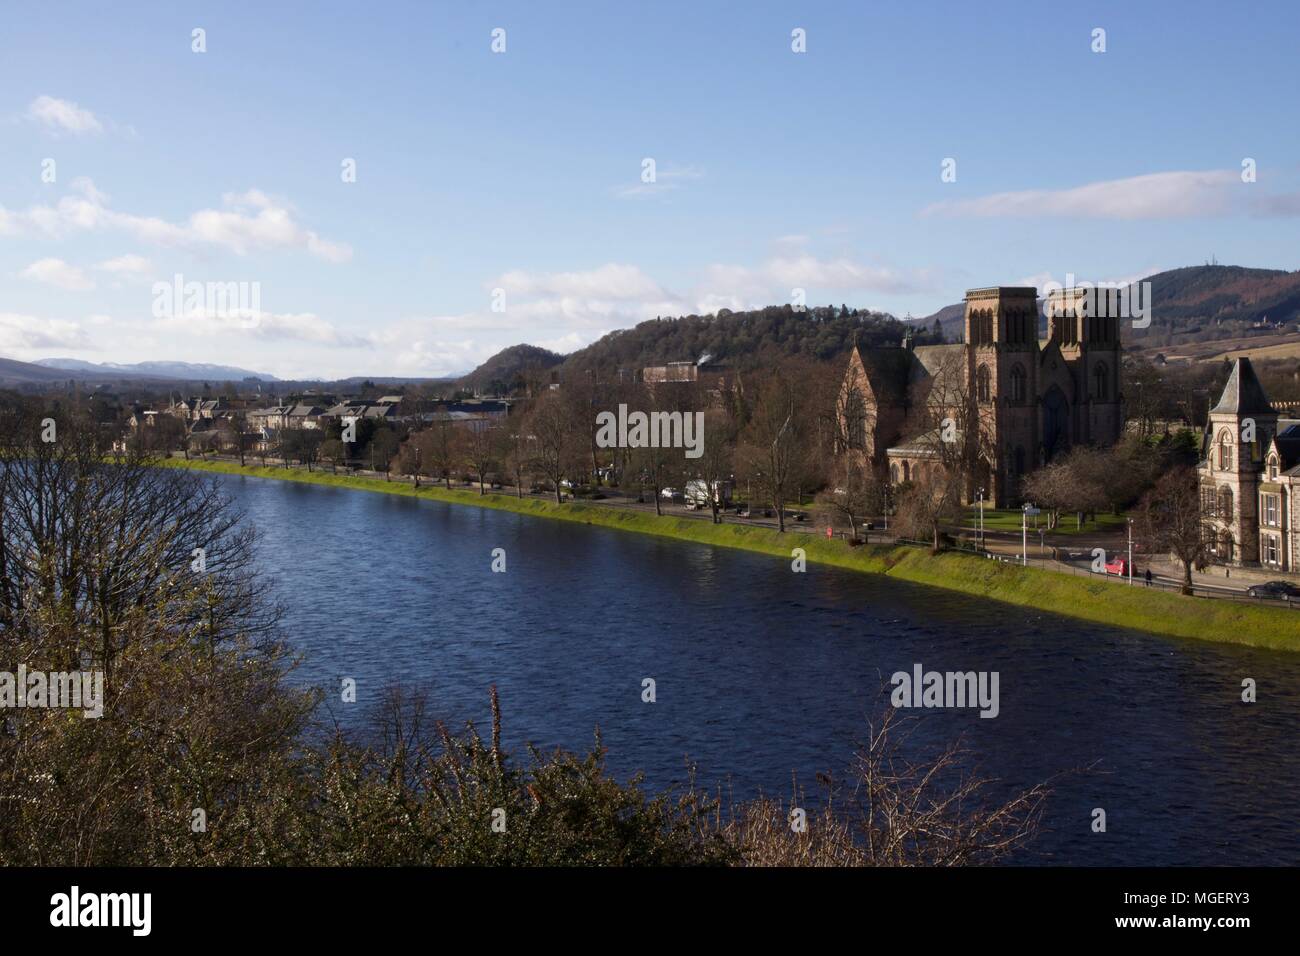 A cathedral in Inverness runs along the Scottish city river on a sunny day with blue skies and green trees in the foreground Stock Photo